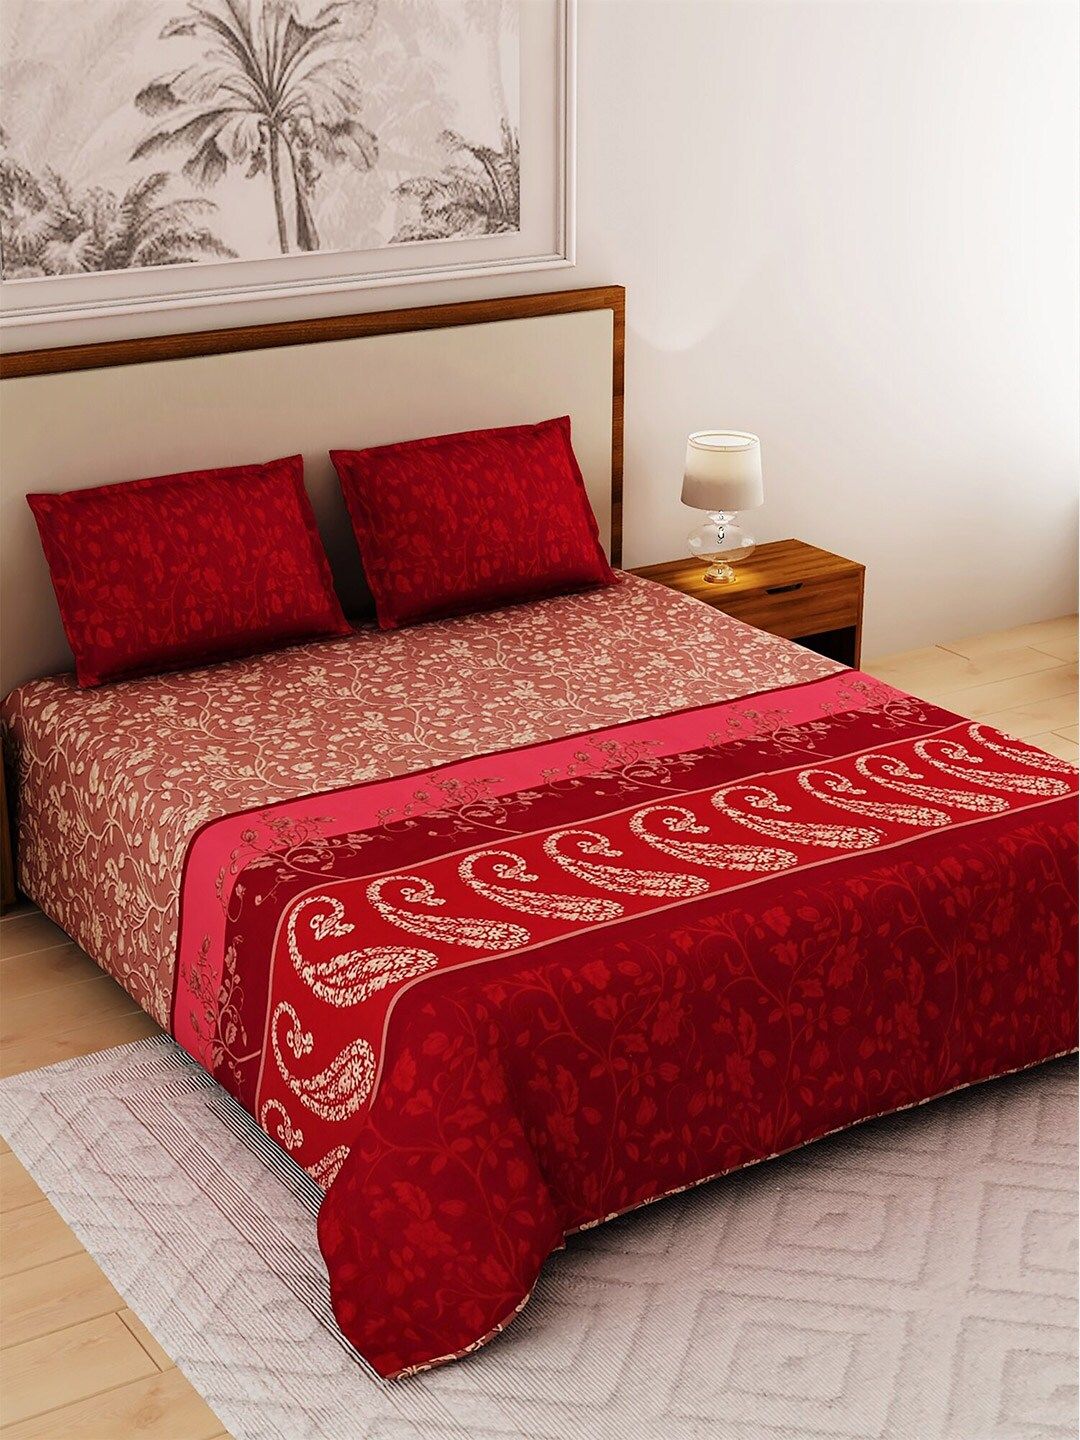 Salona Bichona Maroon & Beige 120 TC Cotton 1 Double King Bedsheet with 2 Pillow Covers Price in India